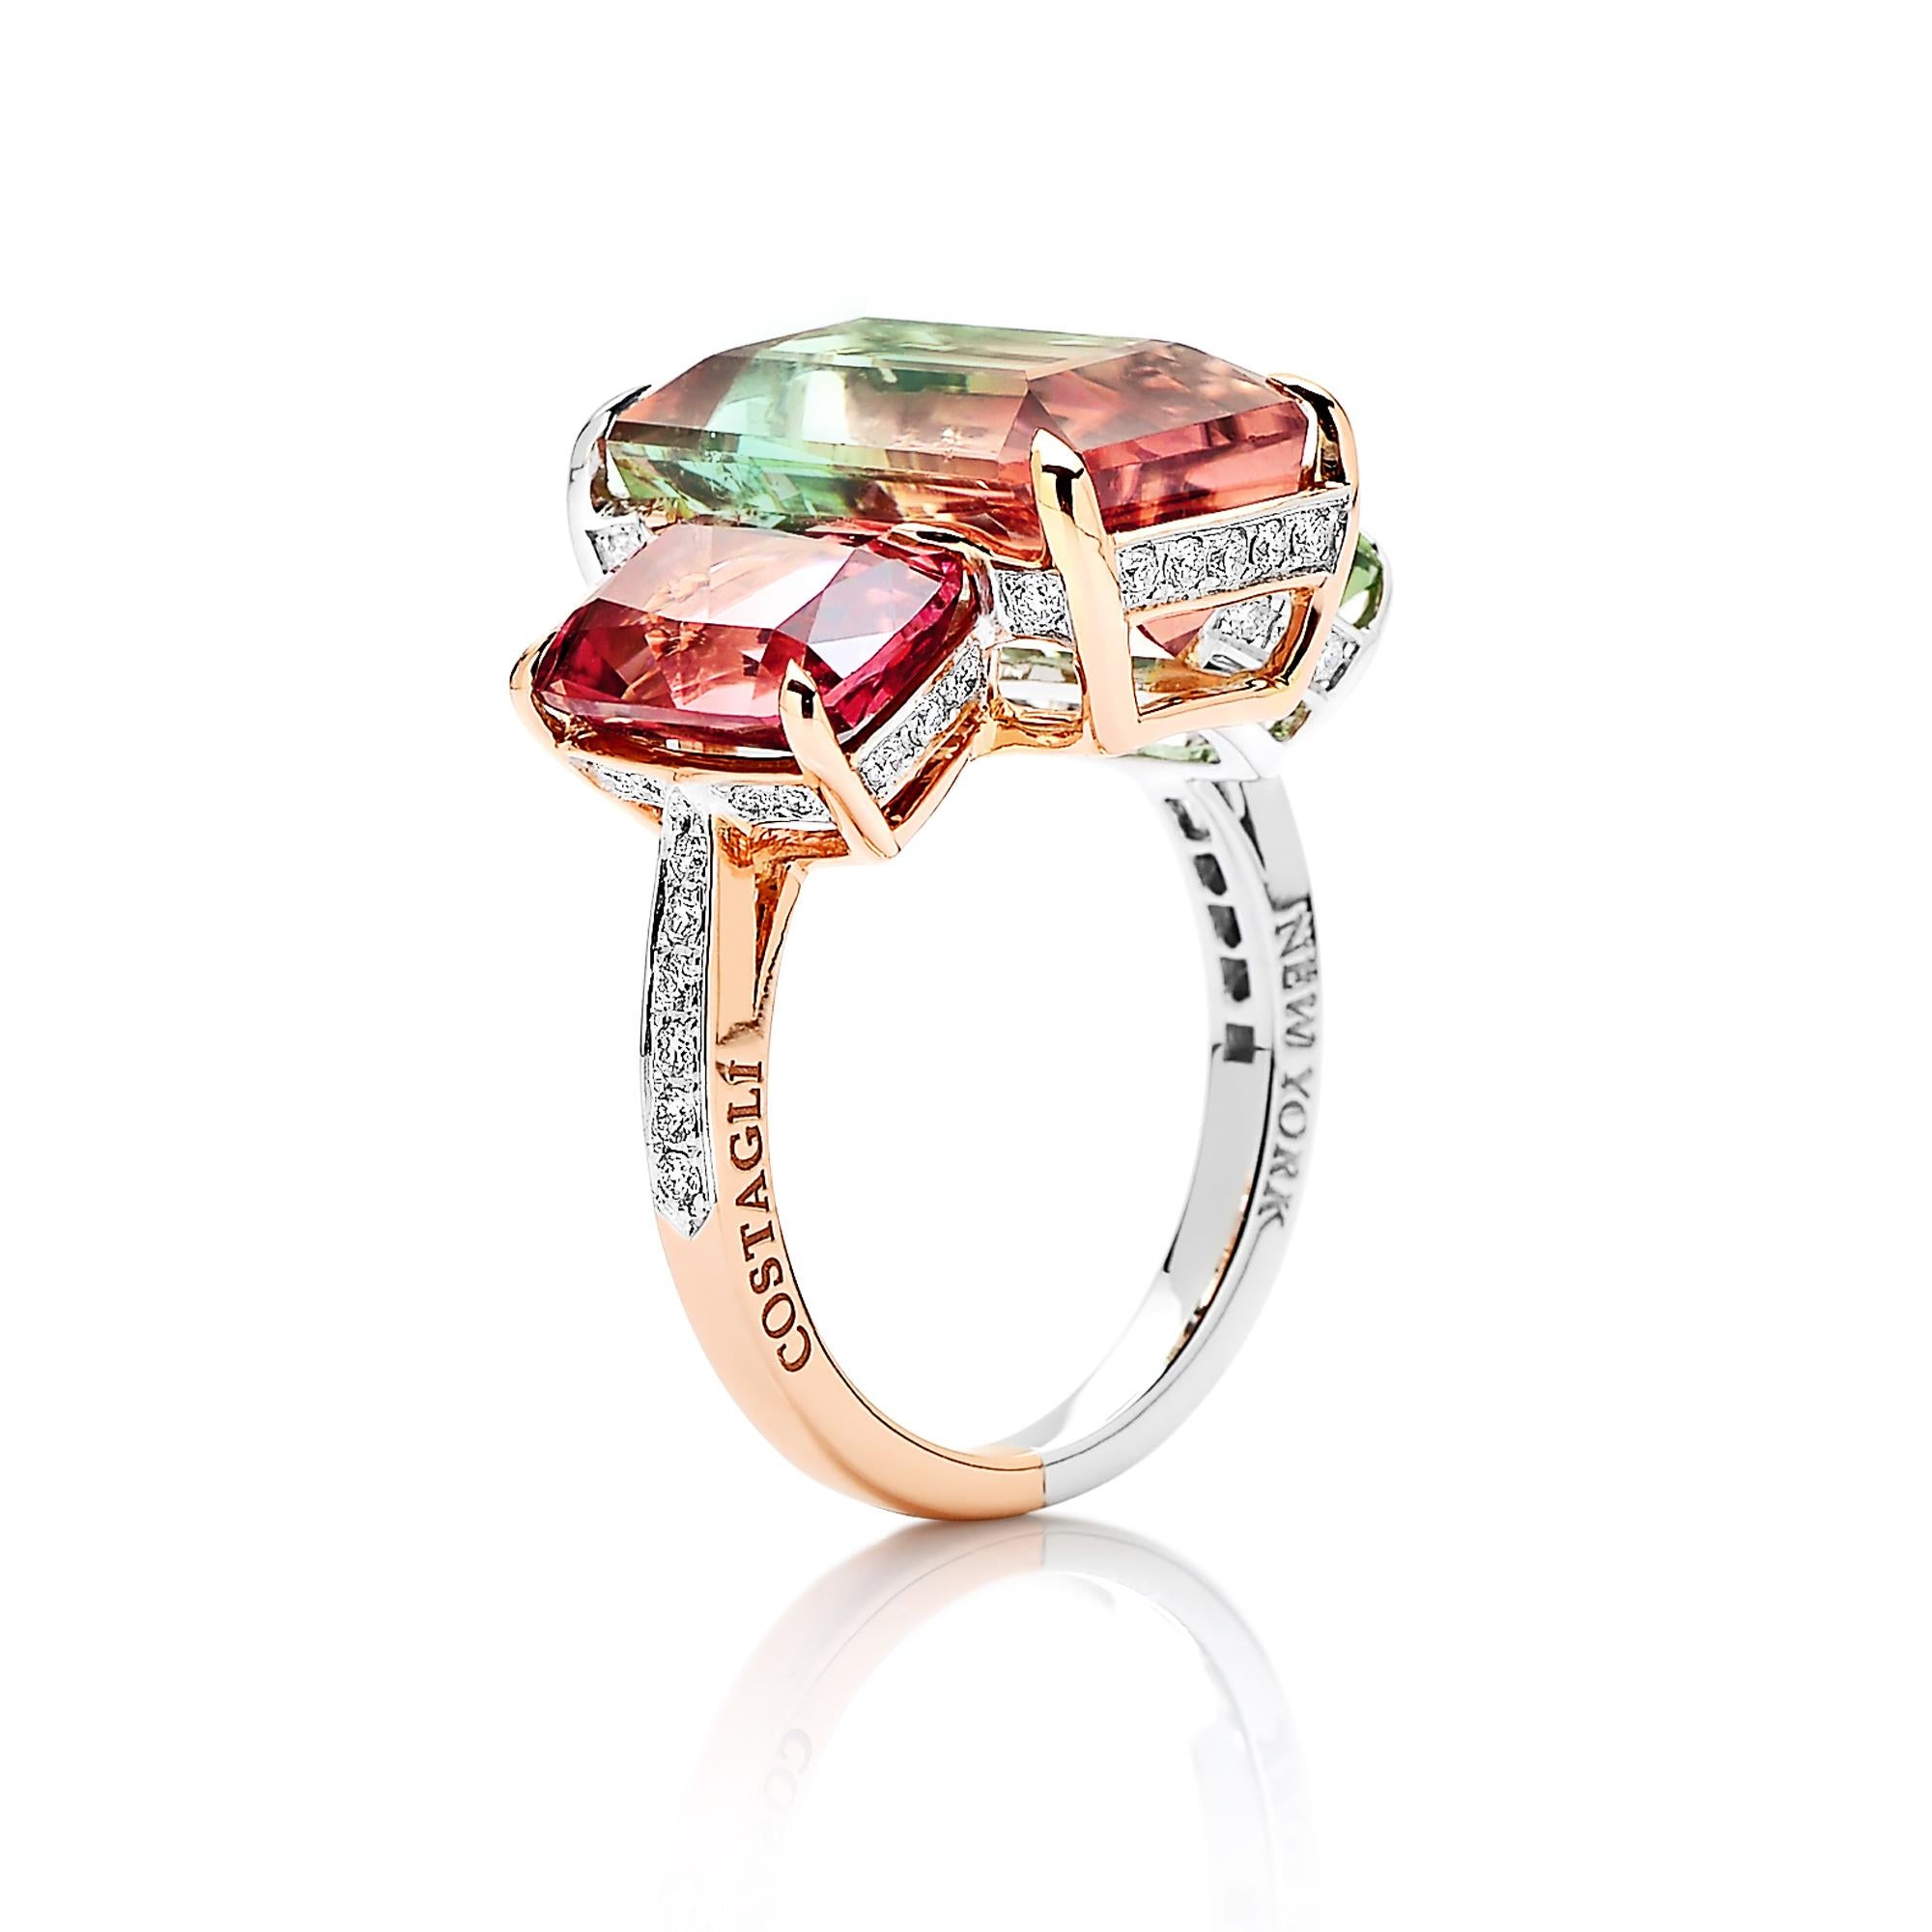 One-of-a-kind watermelon tourmaline ring set with cushion-shaped pink and mint tourmaline side stones set in both 18 karat white gold and 18 karat rose gold and pave-set diamonds.

This ring is a true 'Paolo' design and a testament to his expert eye